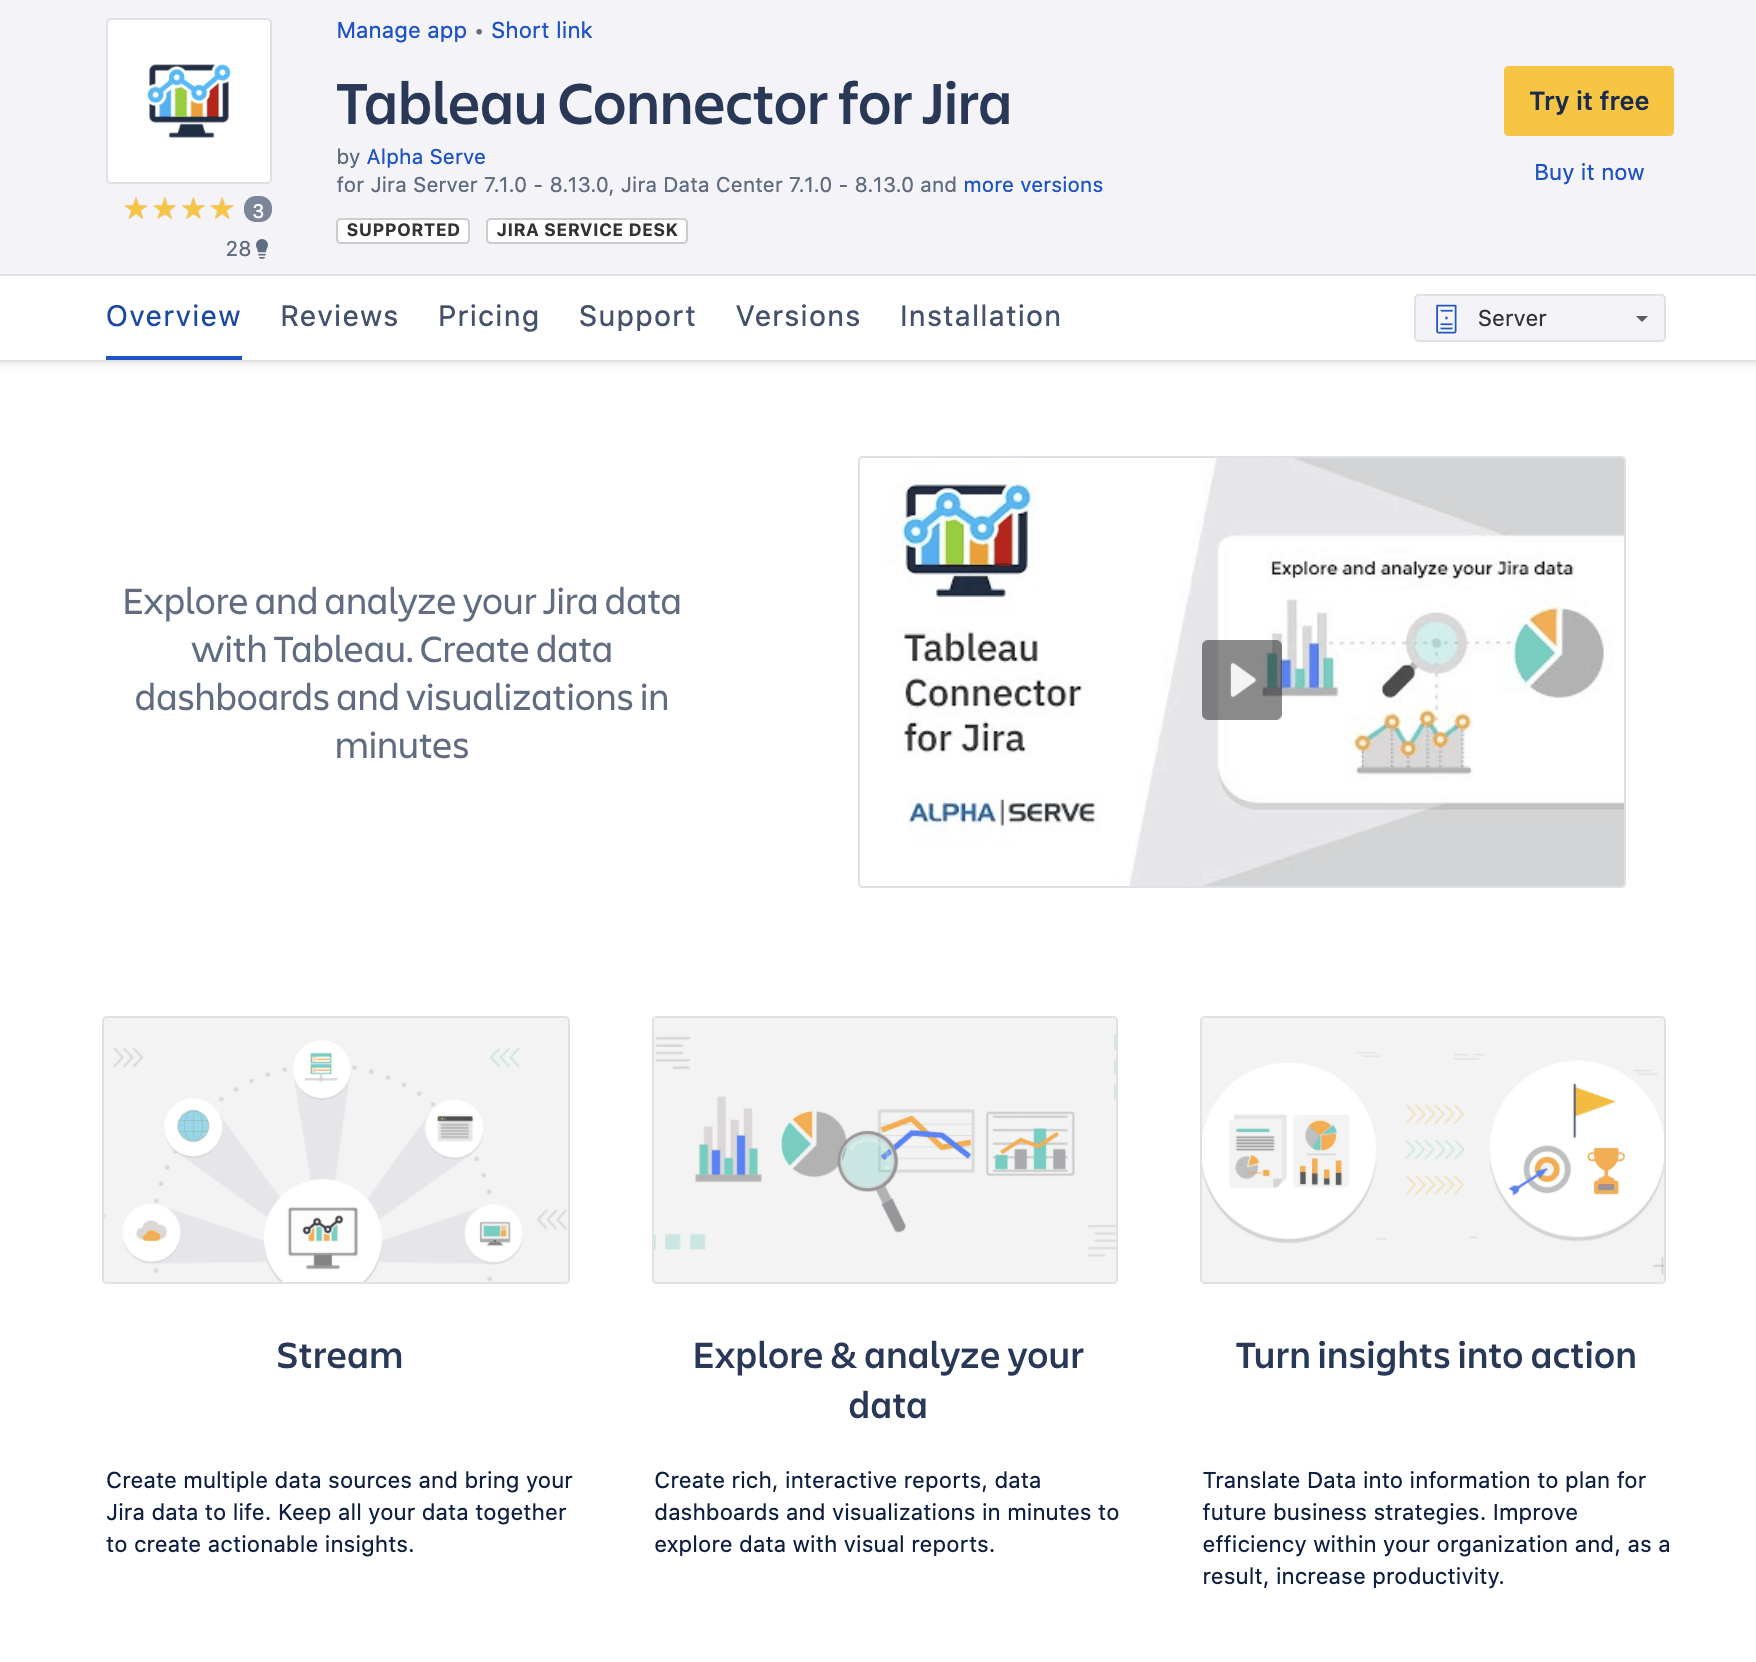 tableau connector for jira